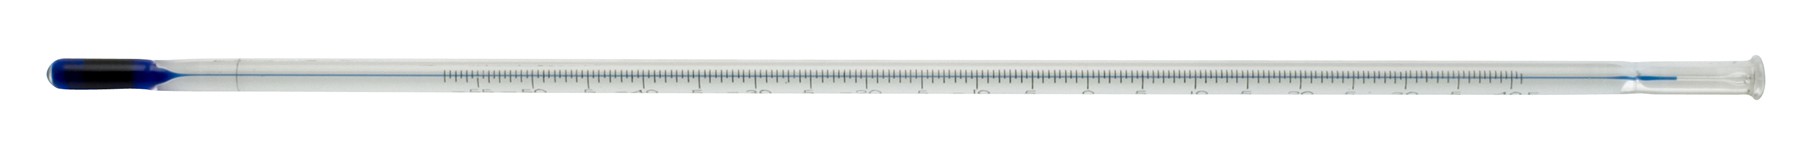 H-B DURAC Plus ASTM Like Liquid-In-Glass Thermometer; 1F / Partial Immersion 76mm, 0 to 302F, Organic Liquid Fill